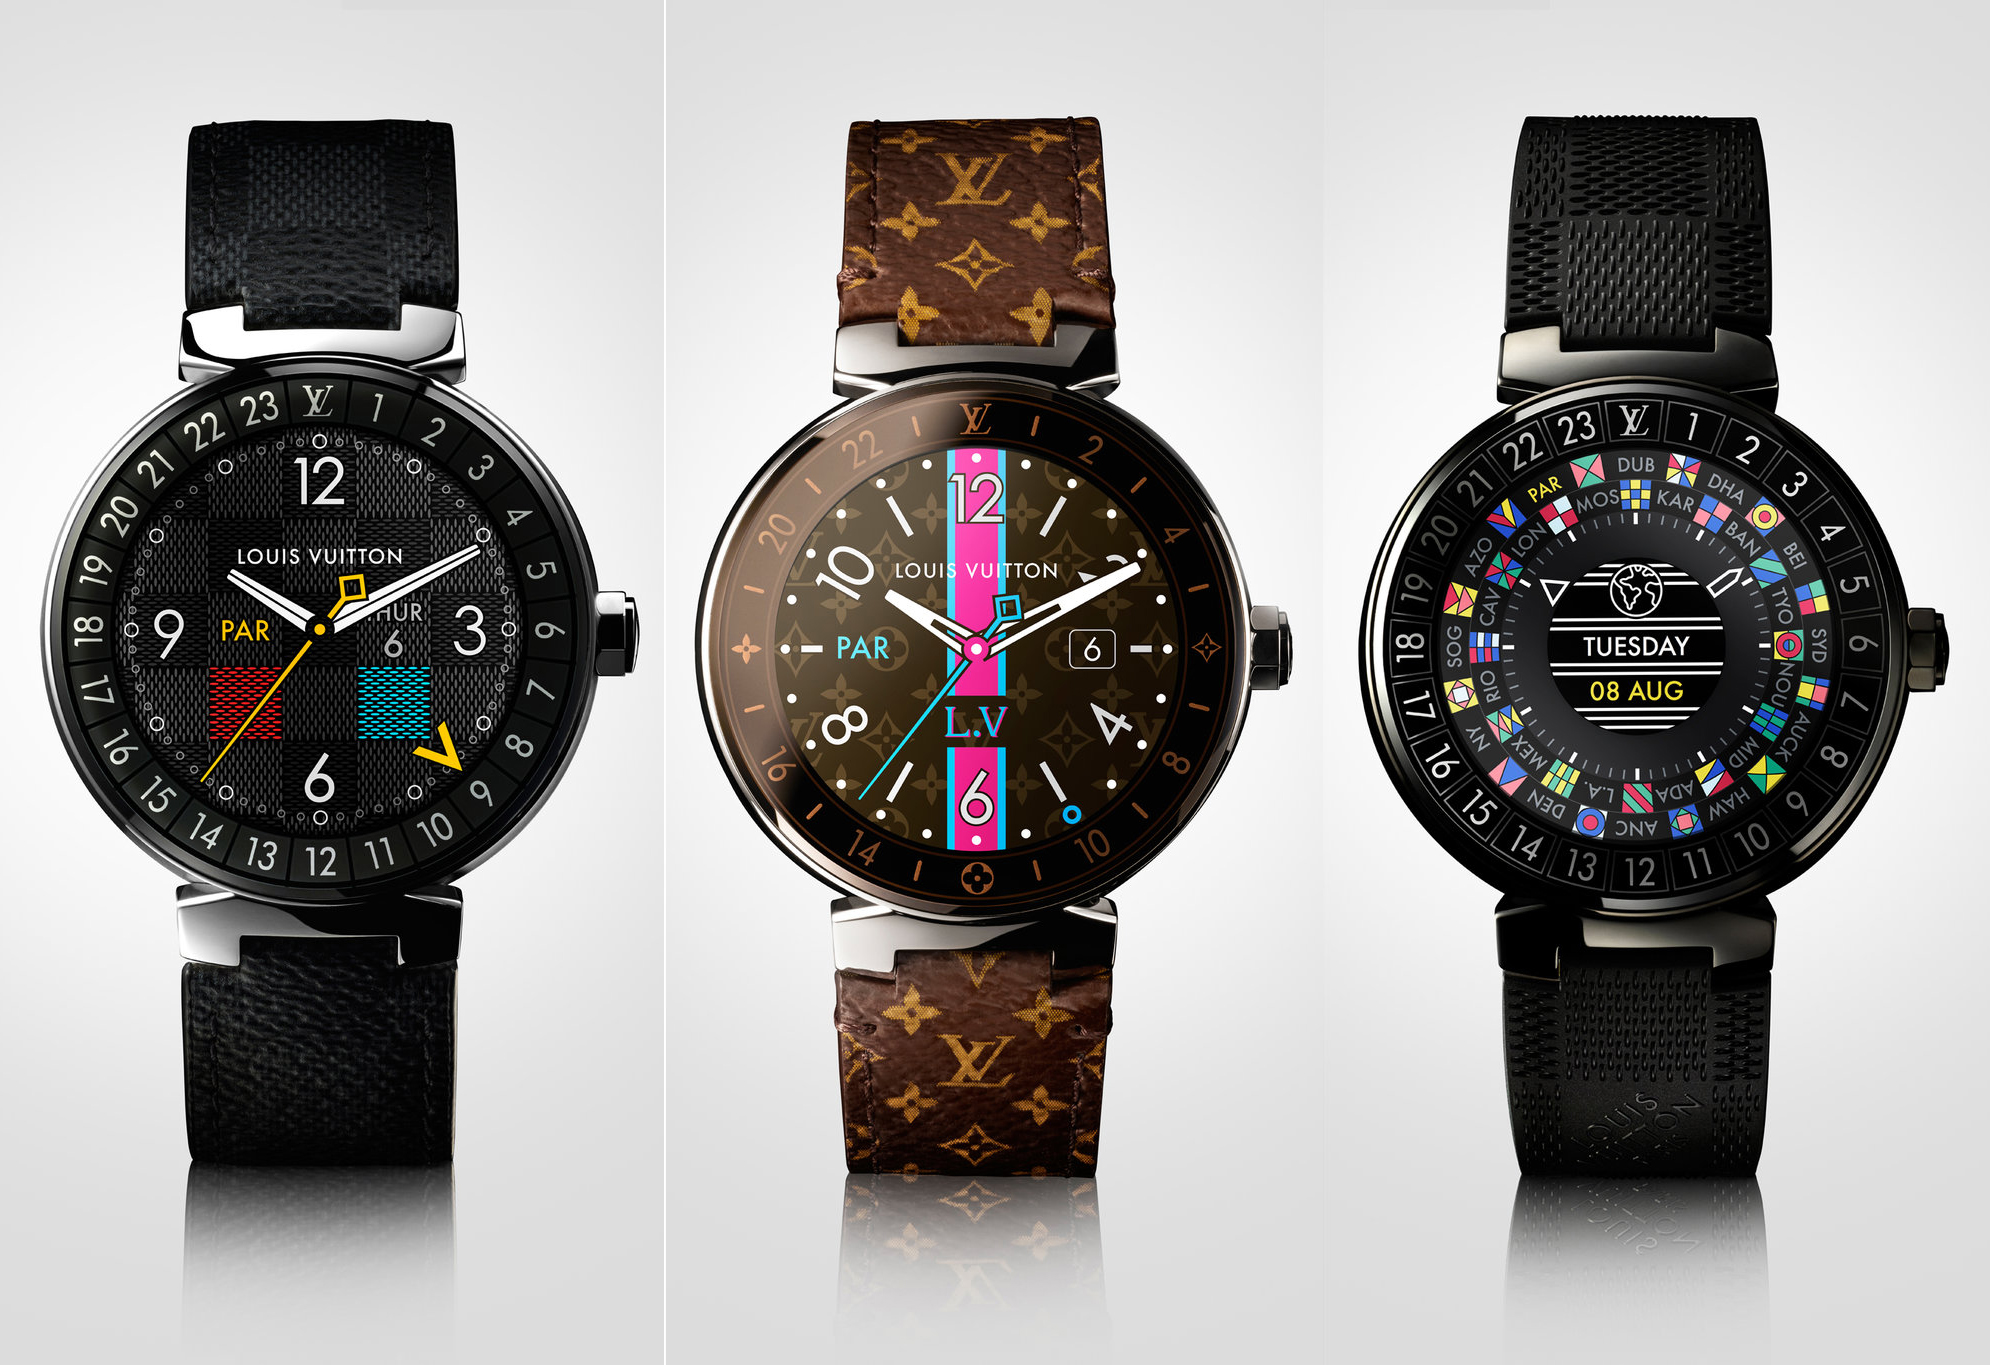 Handbags At LVMH As Stablemates Louis Vuitton And TAG Heuer Clash In Luxury  Smartwatch Space